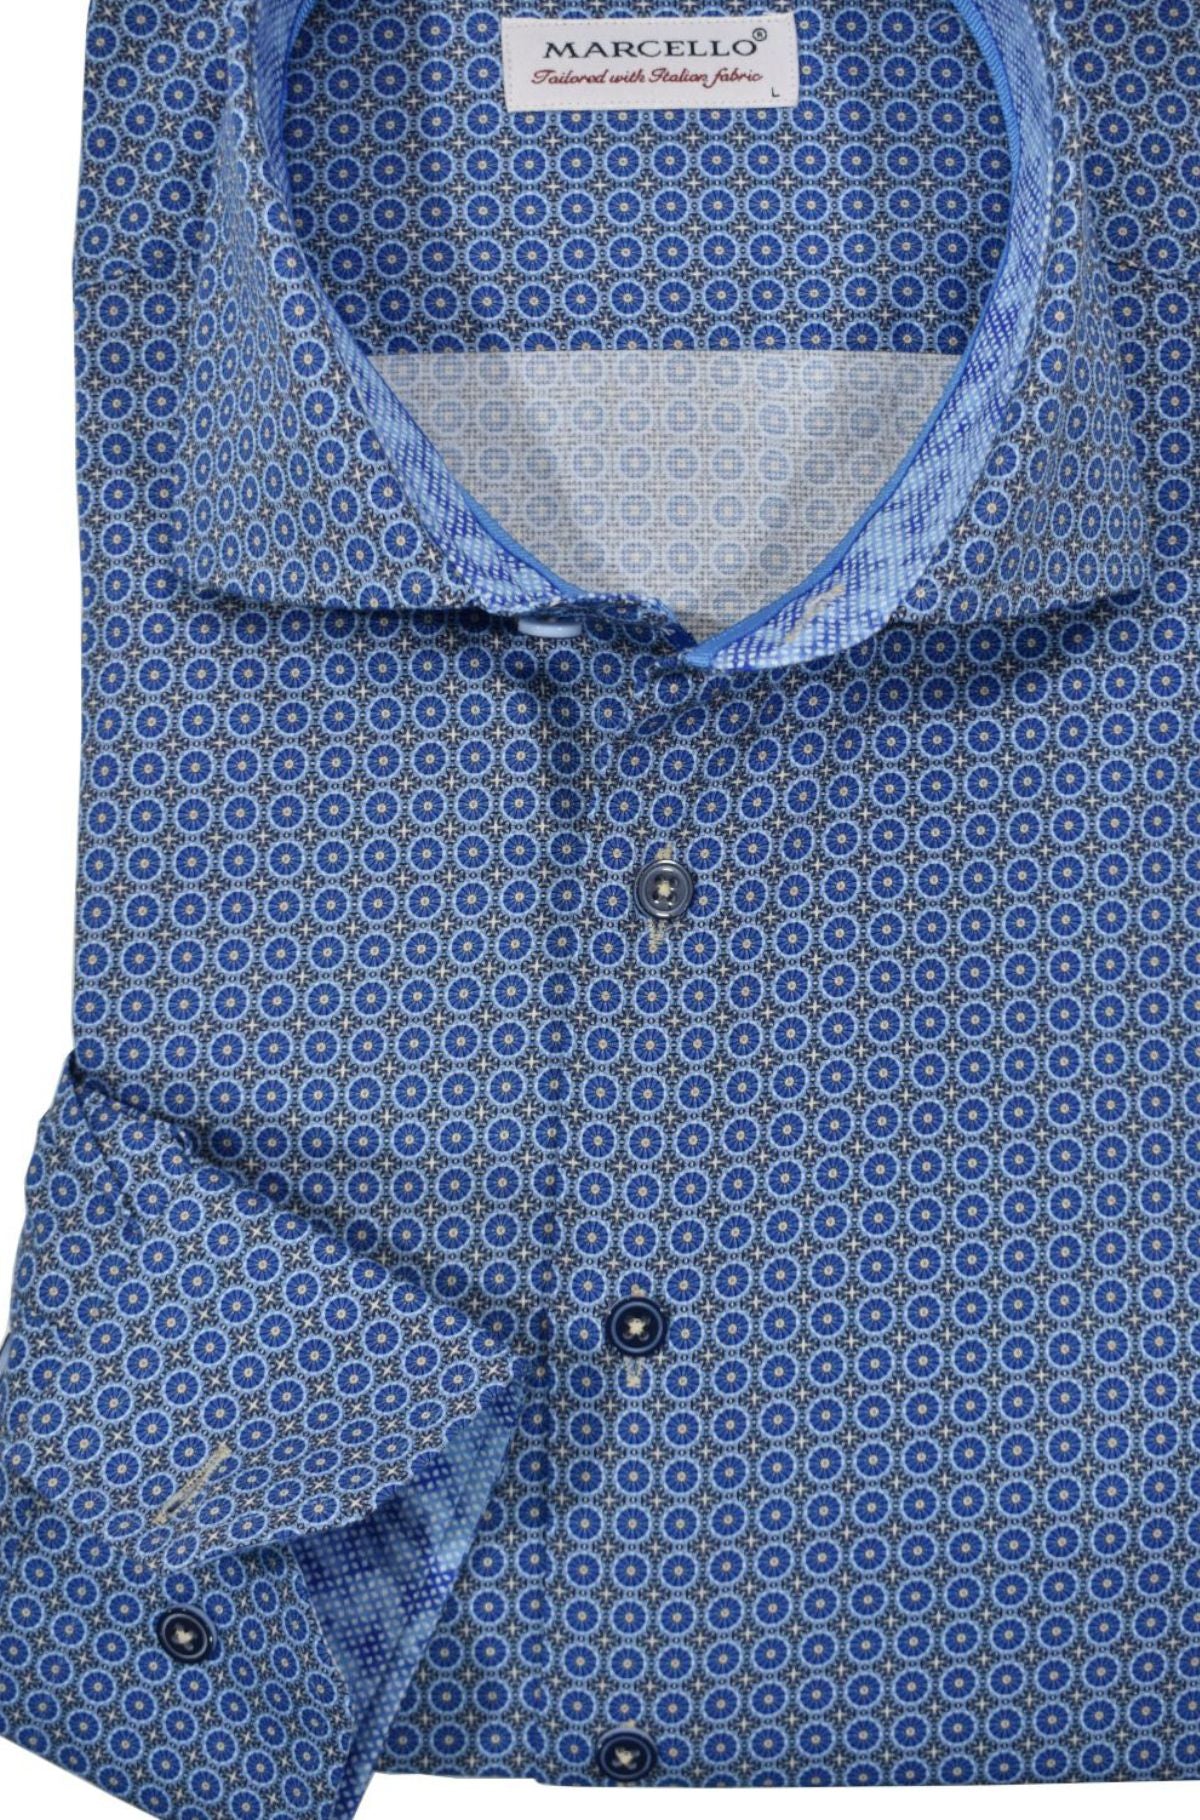 The mixed medallion features an exceptionally rich pattern in shades of blue to for a dress or casual image when paired with many colored bottoms. The bright feel to the shirt pattern creates an upbeat image for a traditional shirt pattern.  The fabric is soft to the touch, consisting of luxe cotton with a touch of lycra to provide diagonal stretch. The result is a luxurious feel with a little stretch for added comfort.